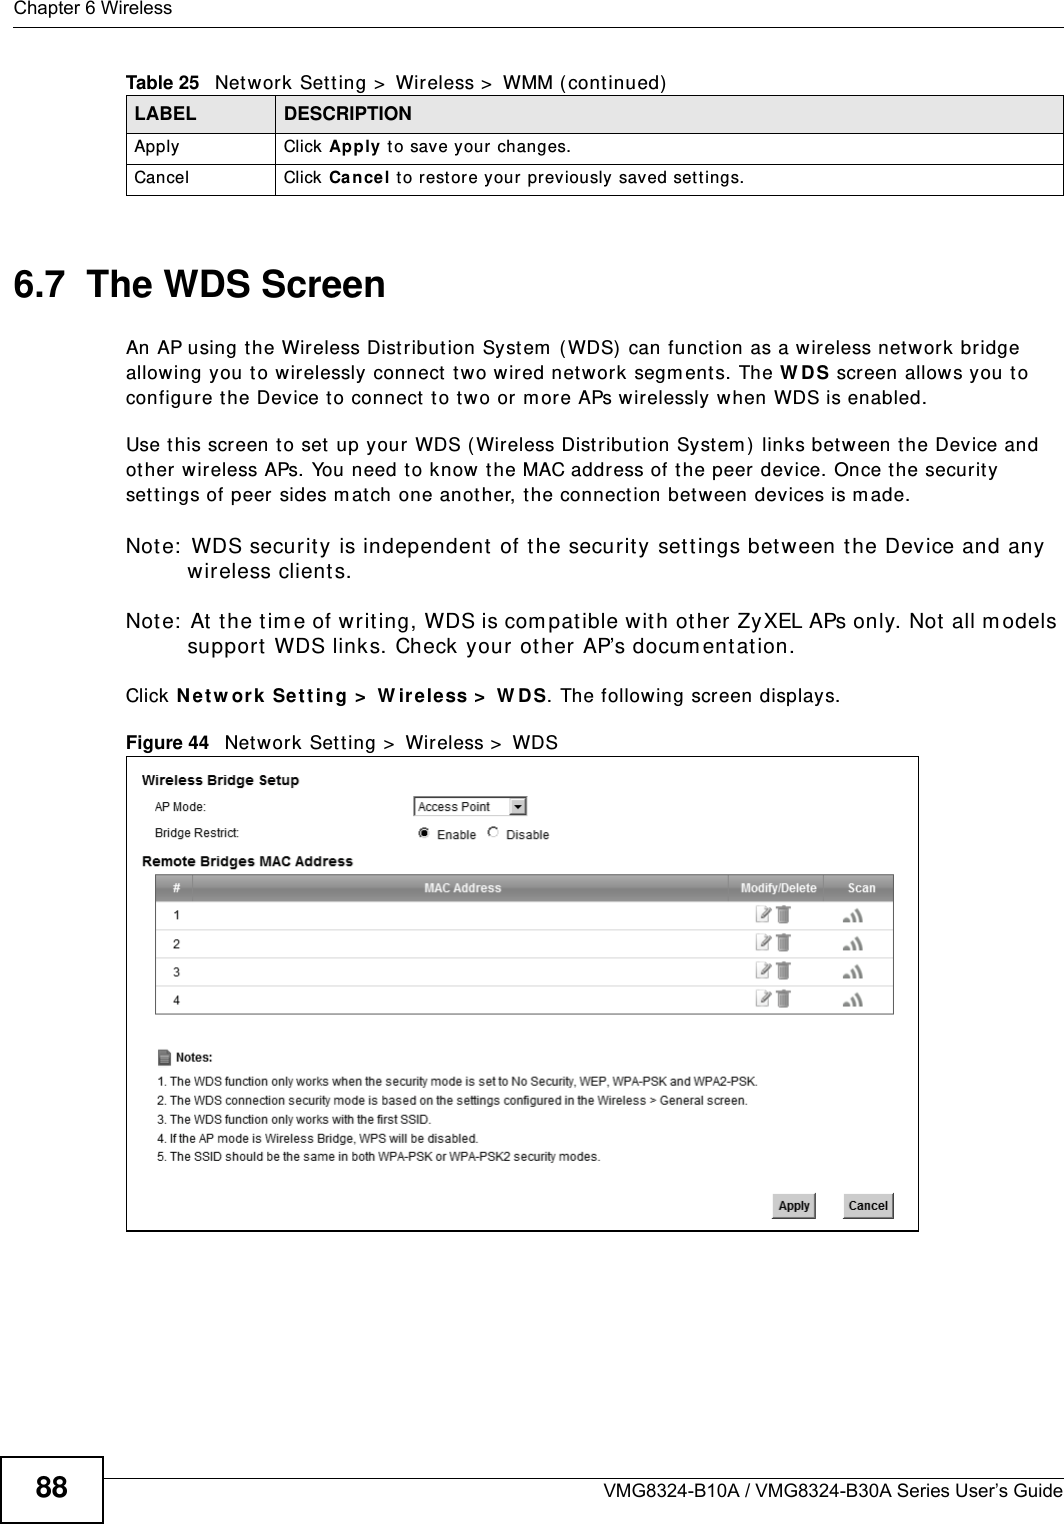 Chapter 6 WirelessVMG8324-B10A / VMG8324-B30A Series User’s Guide886.7  The WDS ScreenAn AP using t he Wireless Dist ribut ion Syst em  ( WDS)  can function as a wireless net work bridge allowing you t o wirelessly connect t wo wir ed network segm ent s. The W DS screen allows you t o configure the Device t o connect t o t w o or m ore APs wirelessly when WDS is enabled. Use t his screen to set up your  WDS ( Wireless Dist ribution System ) links bet ween t he Device and ot her wireless APs. You need to know the MAC address of t he peer  device. Once the security sett ings of peer sides m at ch one anot her, t he connect ion bet ween devices is m ade. Note:  WDS security is independent  of t he securit y set t ings between t he Device and any wireless client s.Not e:  At t he t im e of writ ing, WDS is com pat ible with ot her ZyXEL APs only. Not all m odels support WDS links. Check your other AP’s docum ent ation.Click N et w or k  Set t ing &gt;  W ireless &gt;  W DS. The following screen displays.Figure 44   Net work Set t ing &gt;  Wireless &gt;  WDSApply Click Apply t o save your  changes.Cancel Click Ca n cel t o restore your prev iously saved sett ings.Table 25   Net work Set t ing &gt;  Wireless &gt;  WMM ( cont inued)LABEL DESCRIPTION